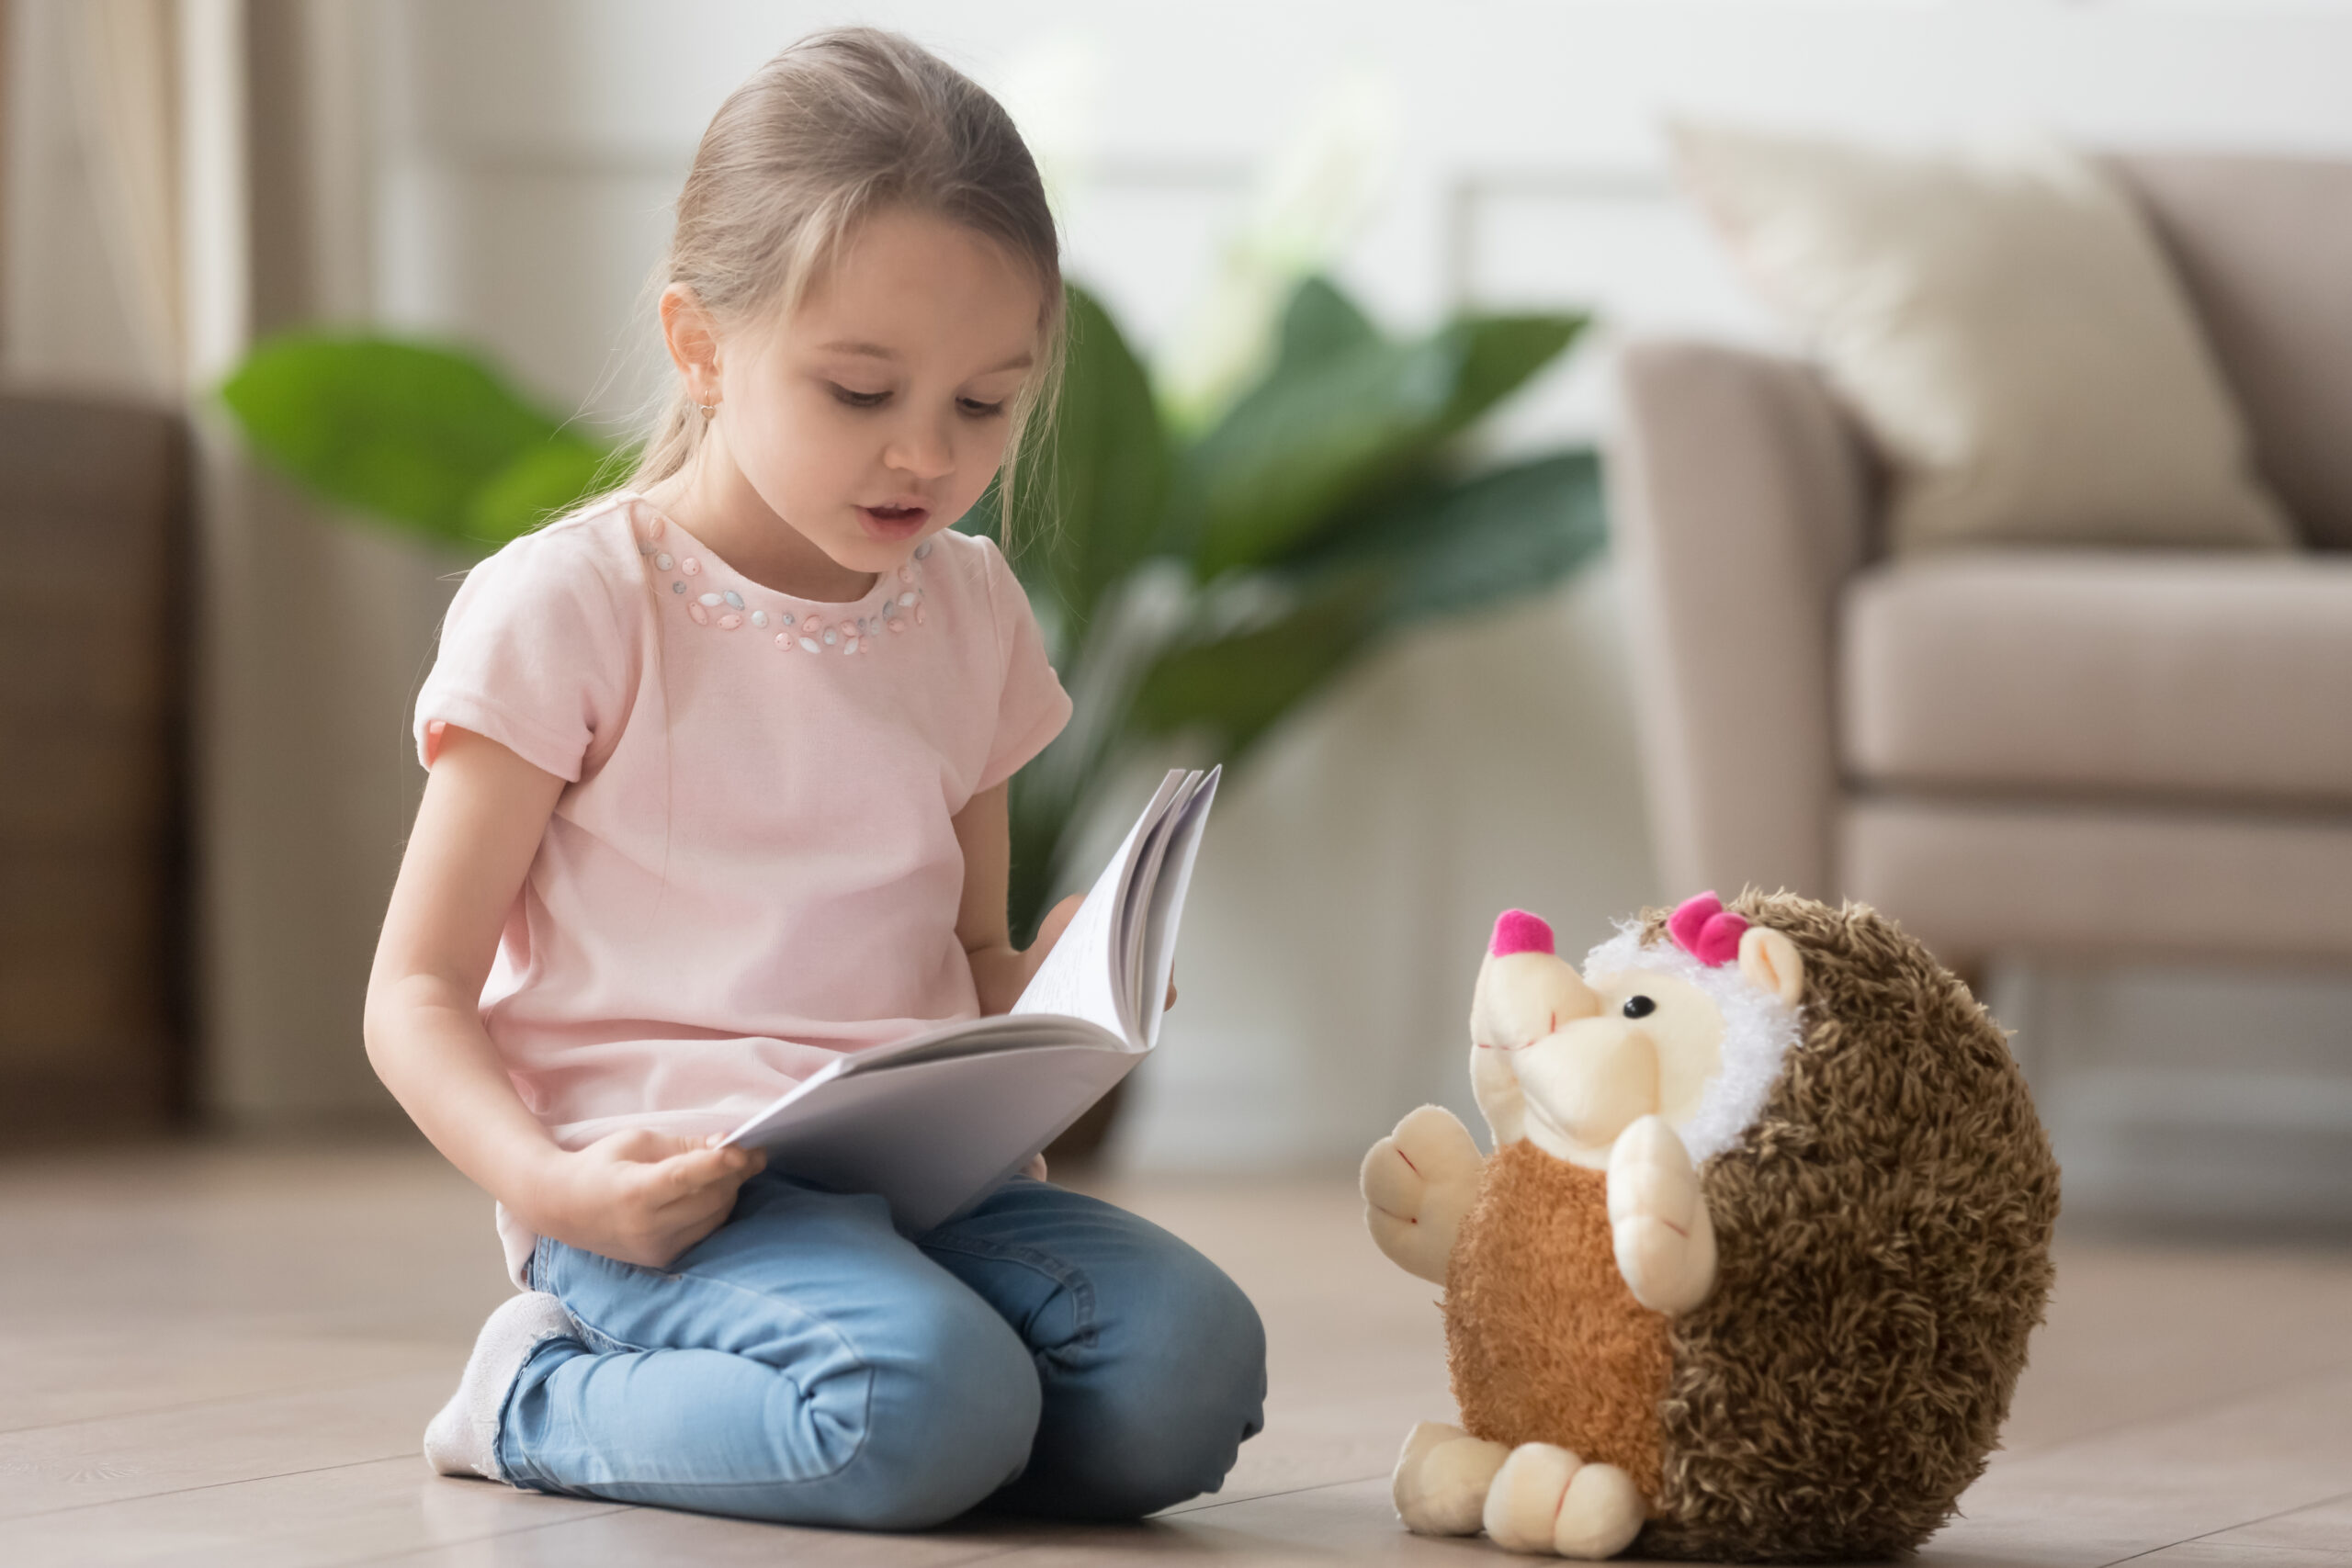 make reading fun for kids of all ages with these book lists filled with books for each grade level